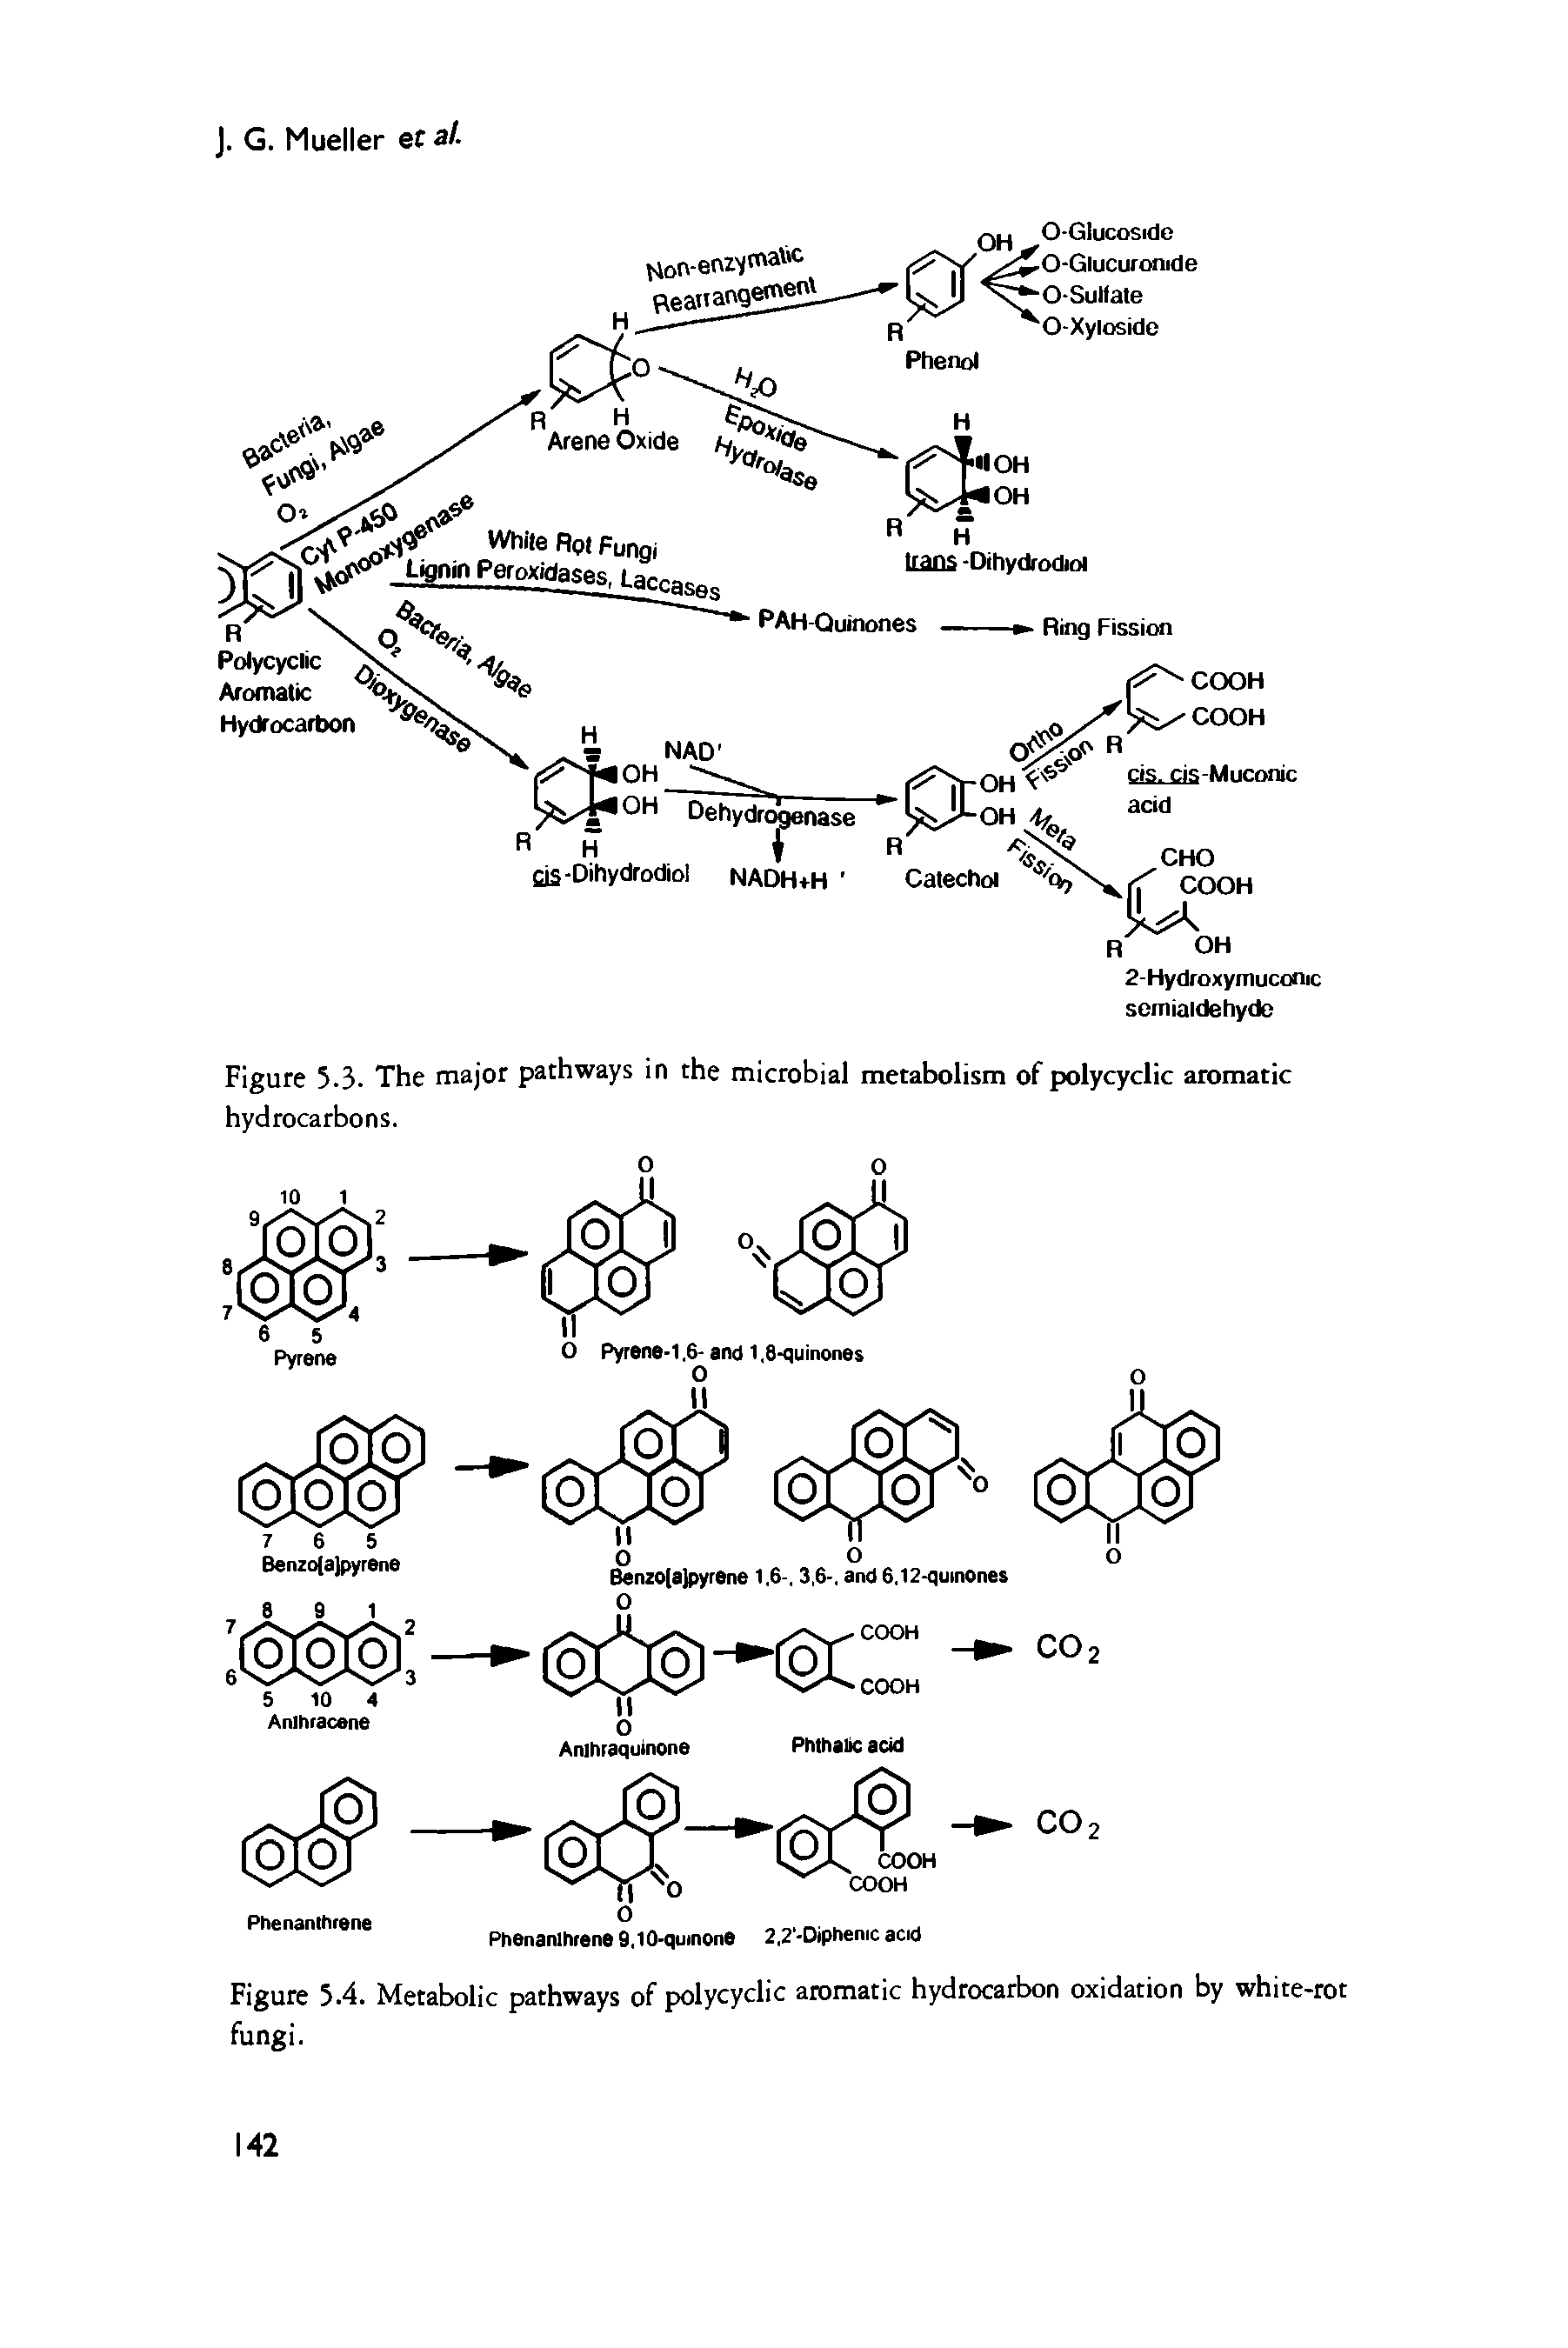 Figure 5.3. The major pathways in the microbial metabolism of polycyclic aromatic hydrocarbons.